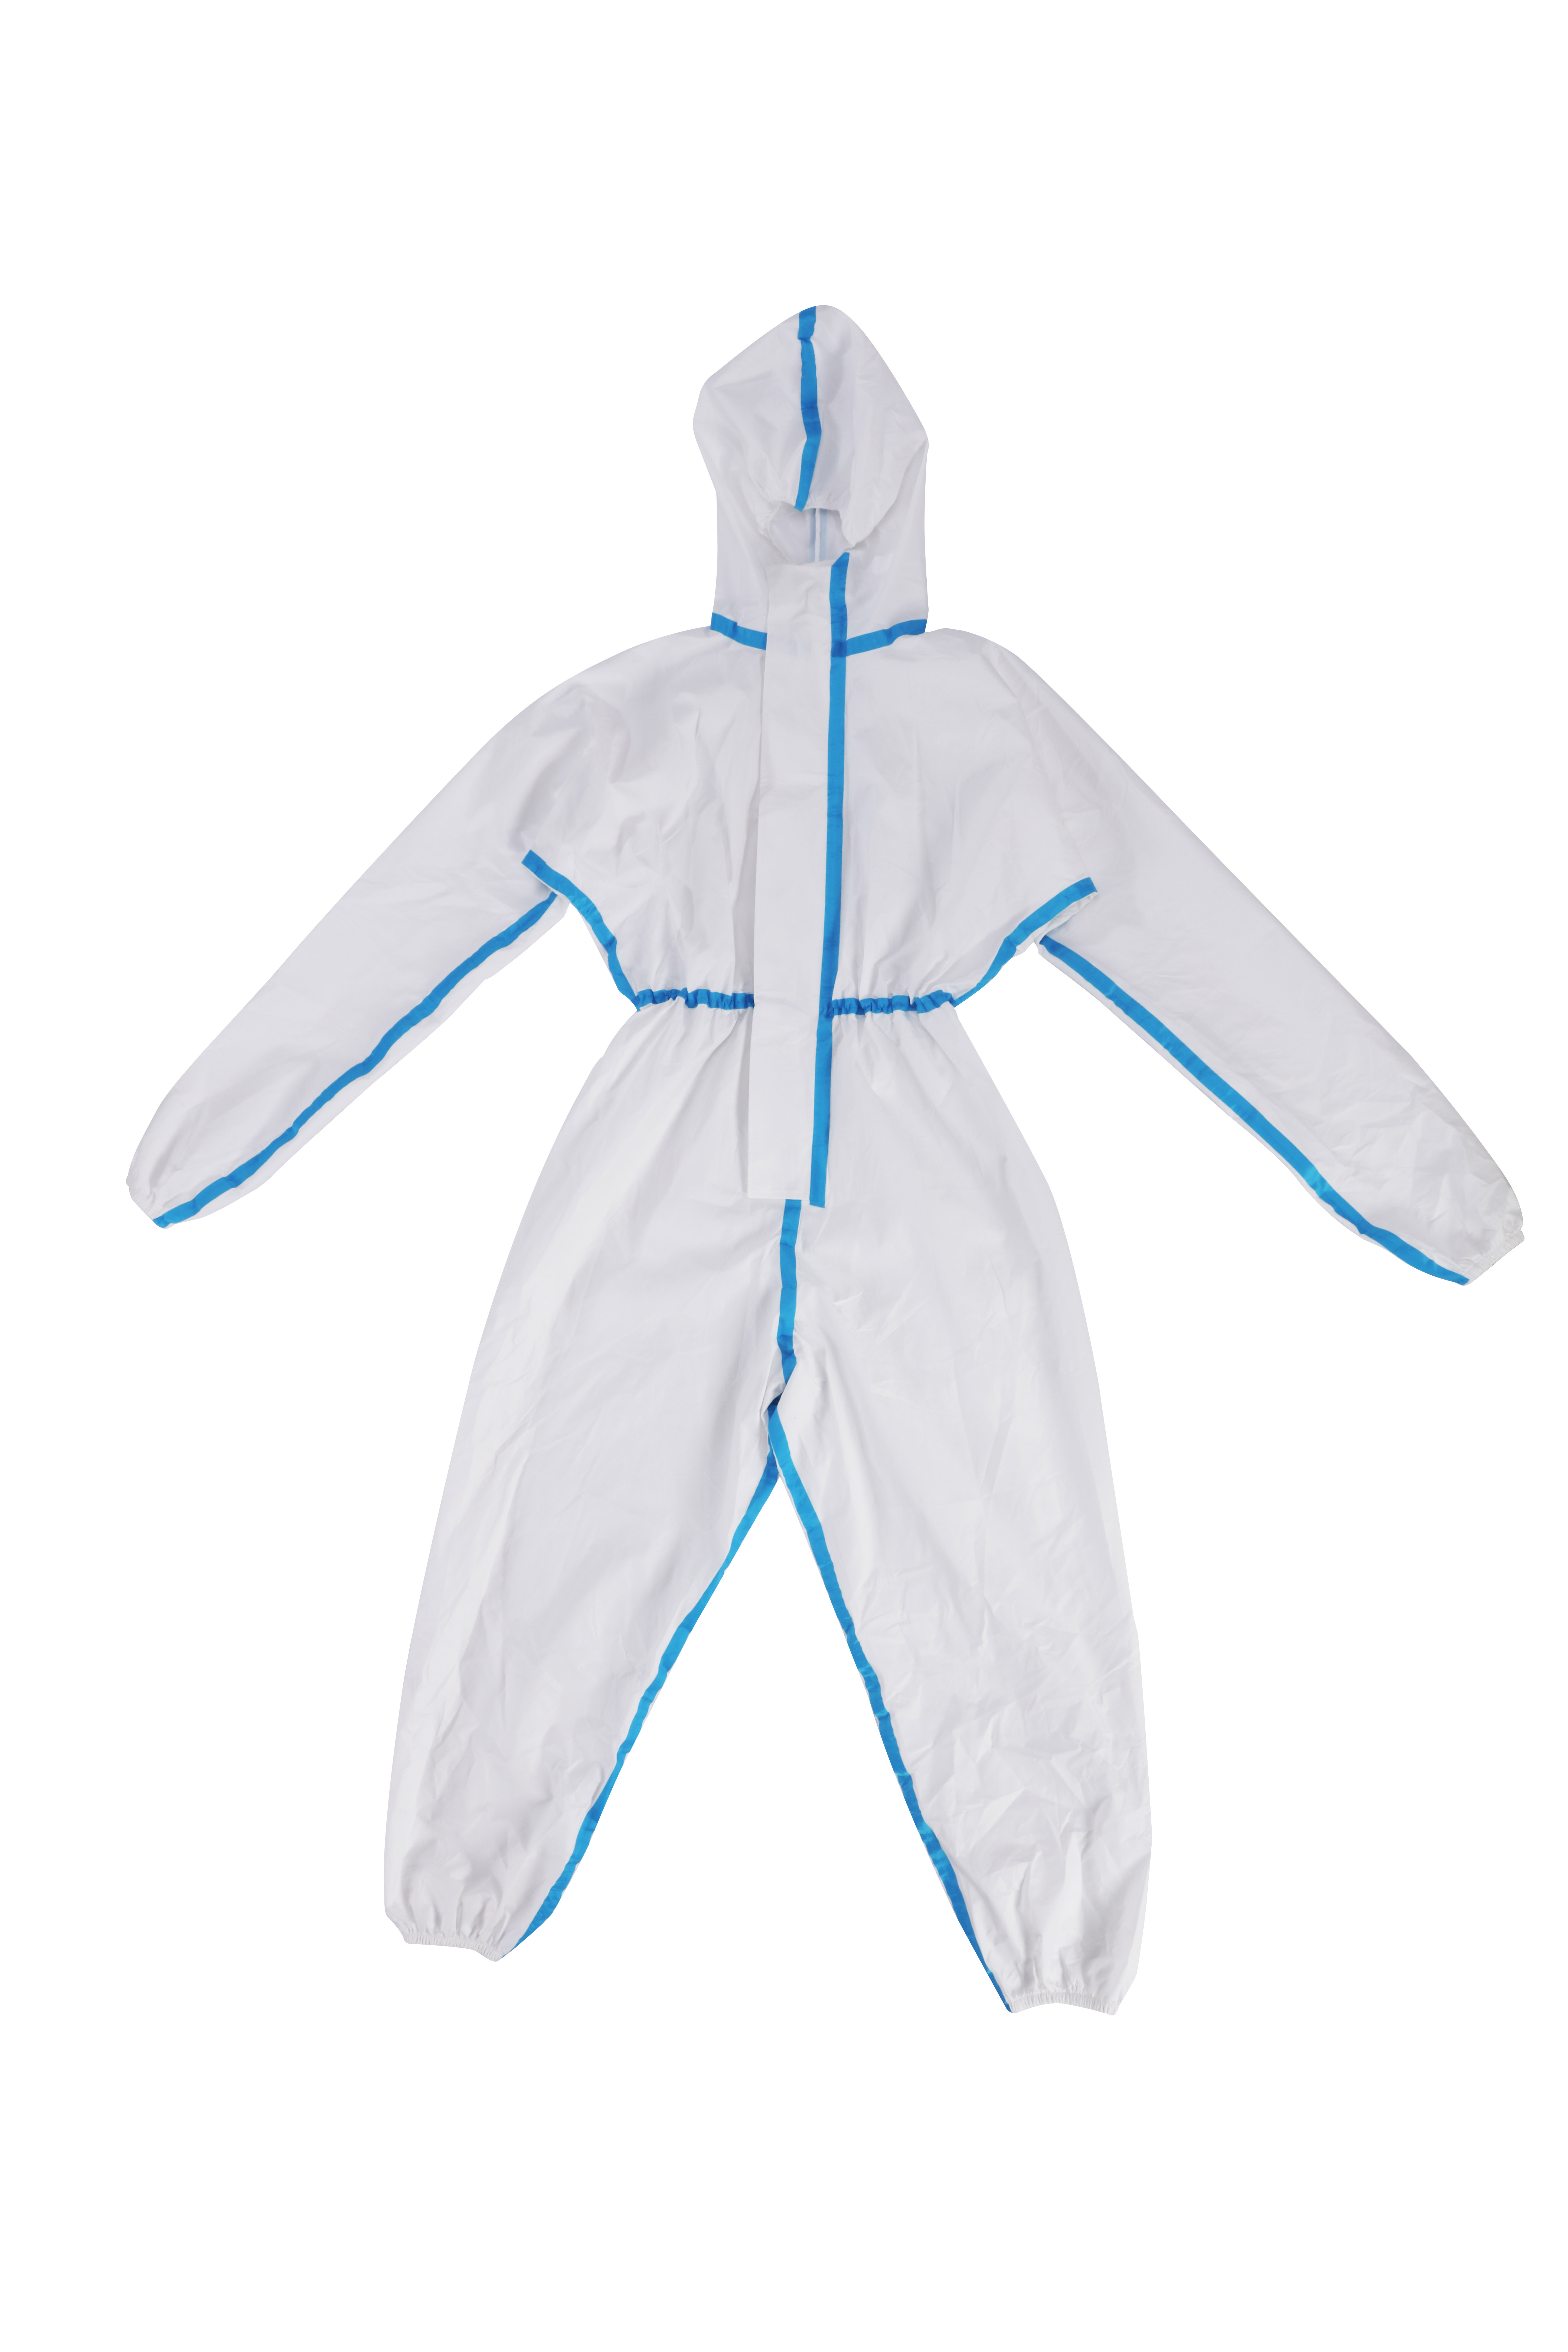  Medical Protective Clothing